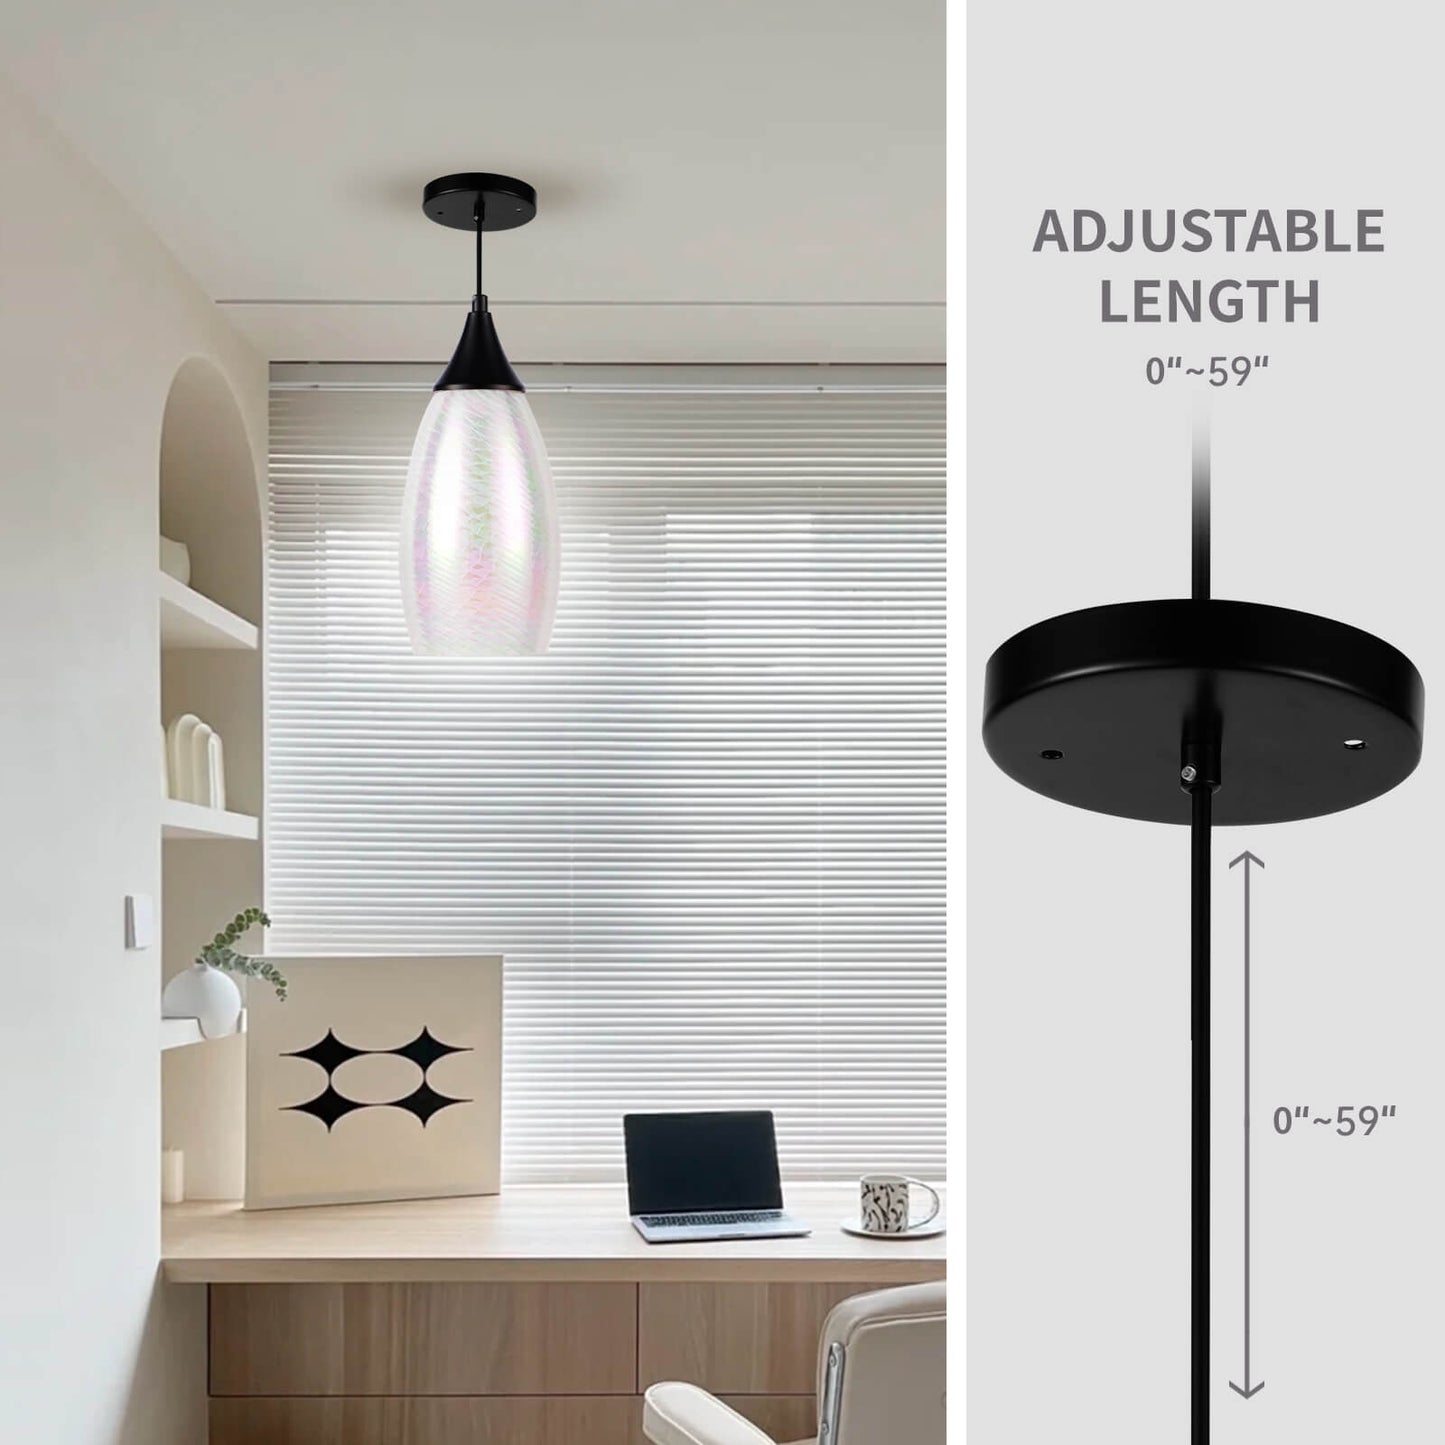 Porseme Pendant Light Features Kitchen Island Hanging Lamp with Plug-in Adjustable Black Cord Handcraft Art Glass Shade E26 Socket for Home Kitchen Sink Counter Make-up Table (White)